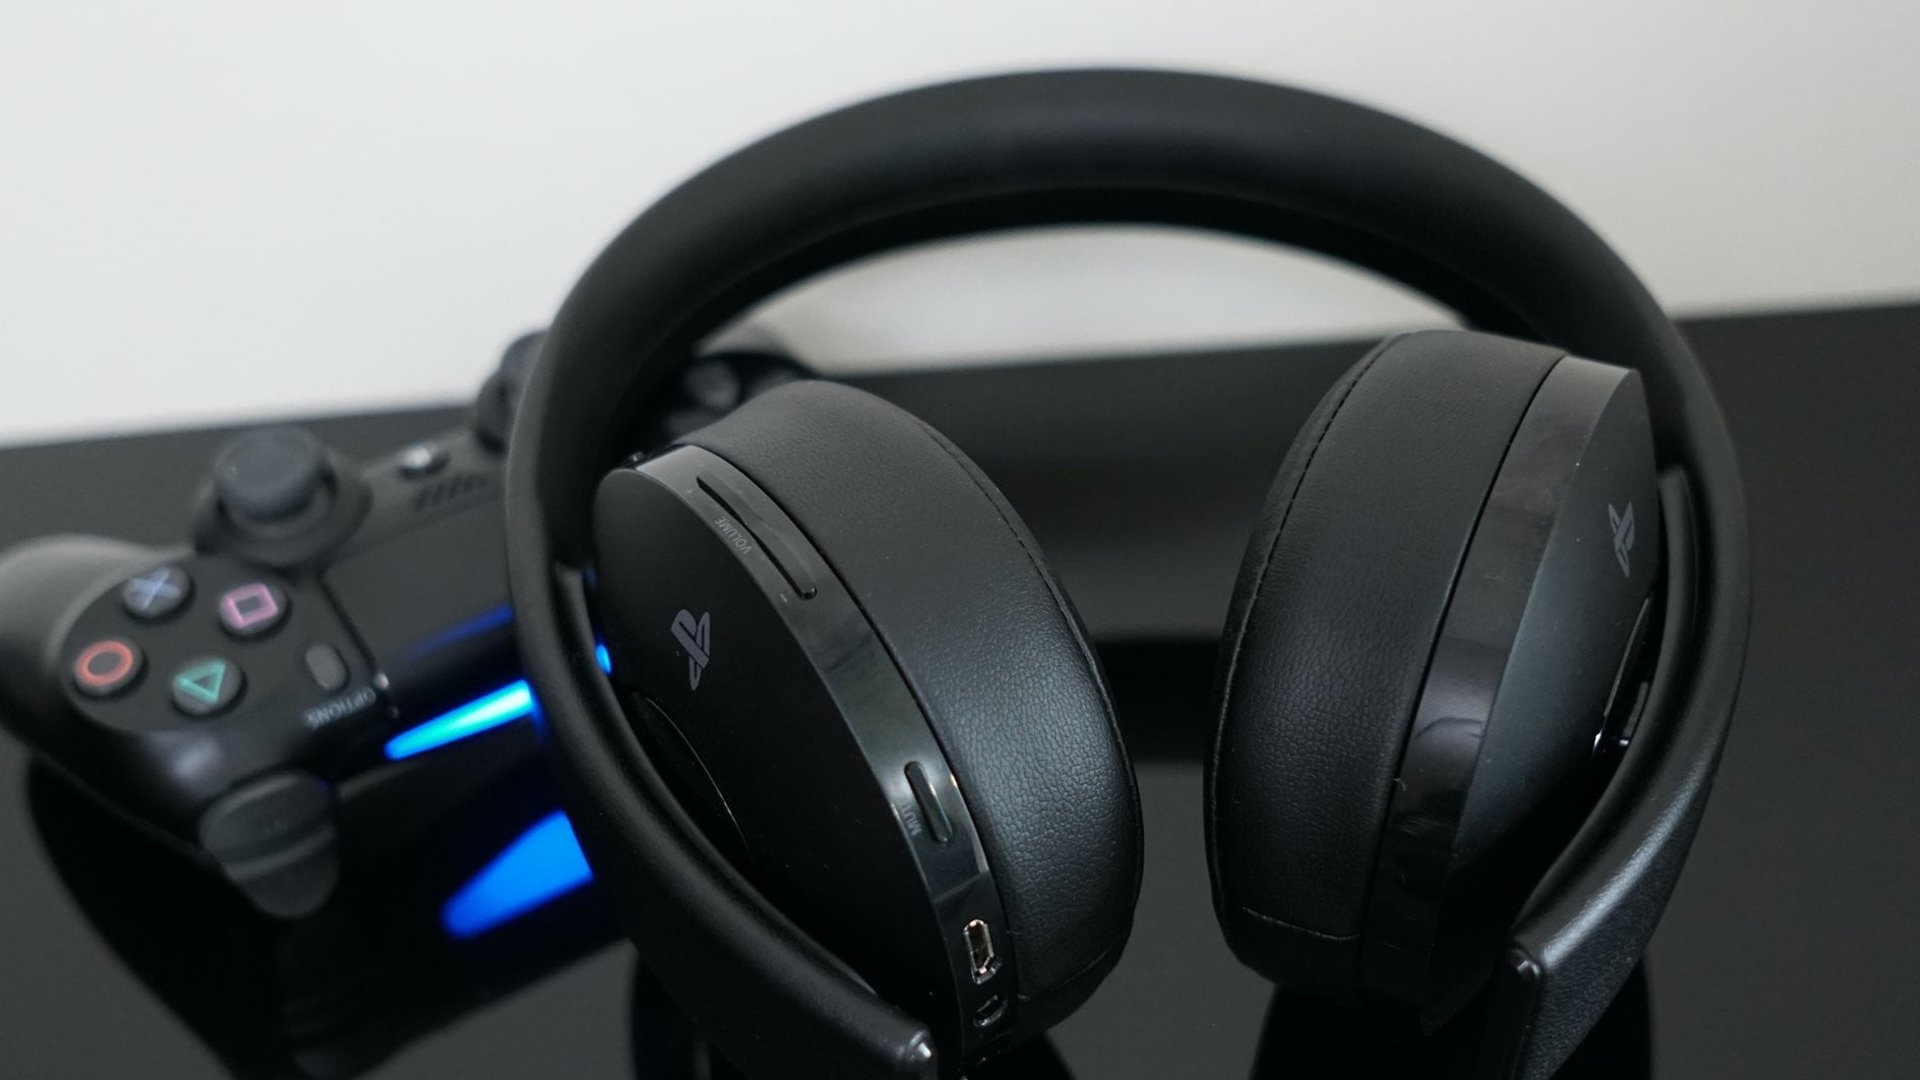 corsair-headset-on-ps4-a-connection-guide